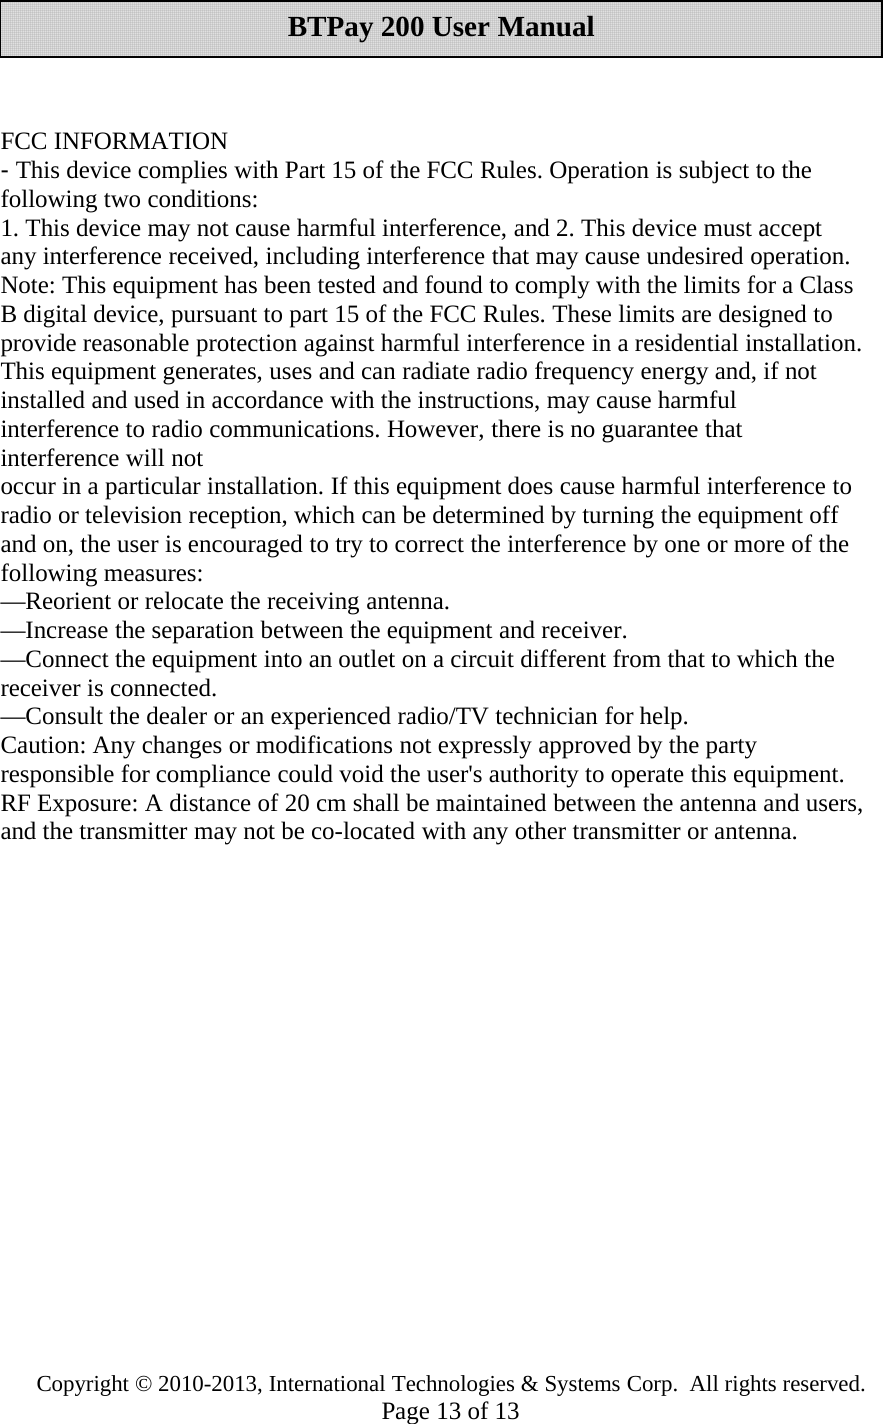 Copyright © 2010-2013, International Technologies &amp; Systems Corp. All rights reserved.Page 13 of 13BTPay 200 User ManualFCC INFORMATION-This device complies with Part 15 of the FCC Rules. Operation is subject to thefollowing two conditions:1. This device may not cause harmful interference, and 2. This device must acceptany interference received, including interference that may cause undesired operation.Note: This equipment has been tested and found to comply with the limits for a ClassB digital device, pursuant to part 15 of the FCC Rules. These limits are designed toprovide reasonable protection against harmful interference in a residential installation.This equipment generates, uses and can radiate radio frequency energy and, if notinstalled and used in accordance with the instructions, may cause harmfulinterference to radio communications. However, there is no guarantee thatinterference will notoccur in a particular installation. If this equipment does cause harmful interference toradio or television reception, which can be determined by turning the equipment offand on, the user is encouraged to try to correct the interference by one or more of thefollowing measures:—Reorient or relocate the receiving antenna.—Increase the separation between the equipment and receiver.—Connect the equipment into an outlet on a circuit different from that to which thereceiver is connected.—Consult the dealer or an experienced radio/TV technician for help.Caution: Any changes or modifications not expressly approved by the partyresponsible for compliance could void the user&apos;s authority to operate this equipment.RF Exposure: A distance of 20 cm shall be maintained between the antenna and users,and the transmitter may not be co-located with any other transmitter or antenna.